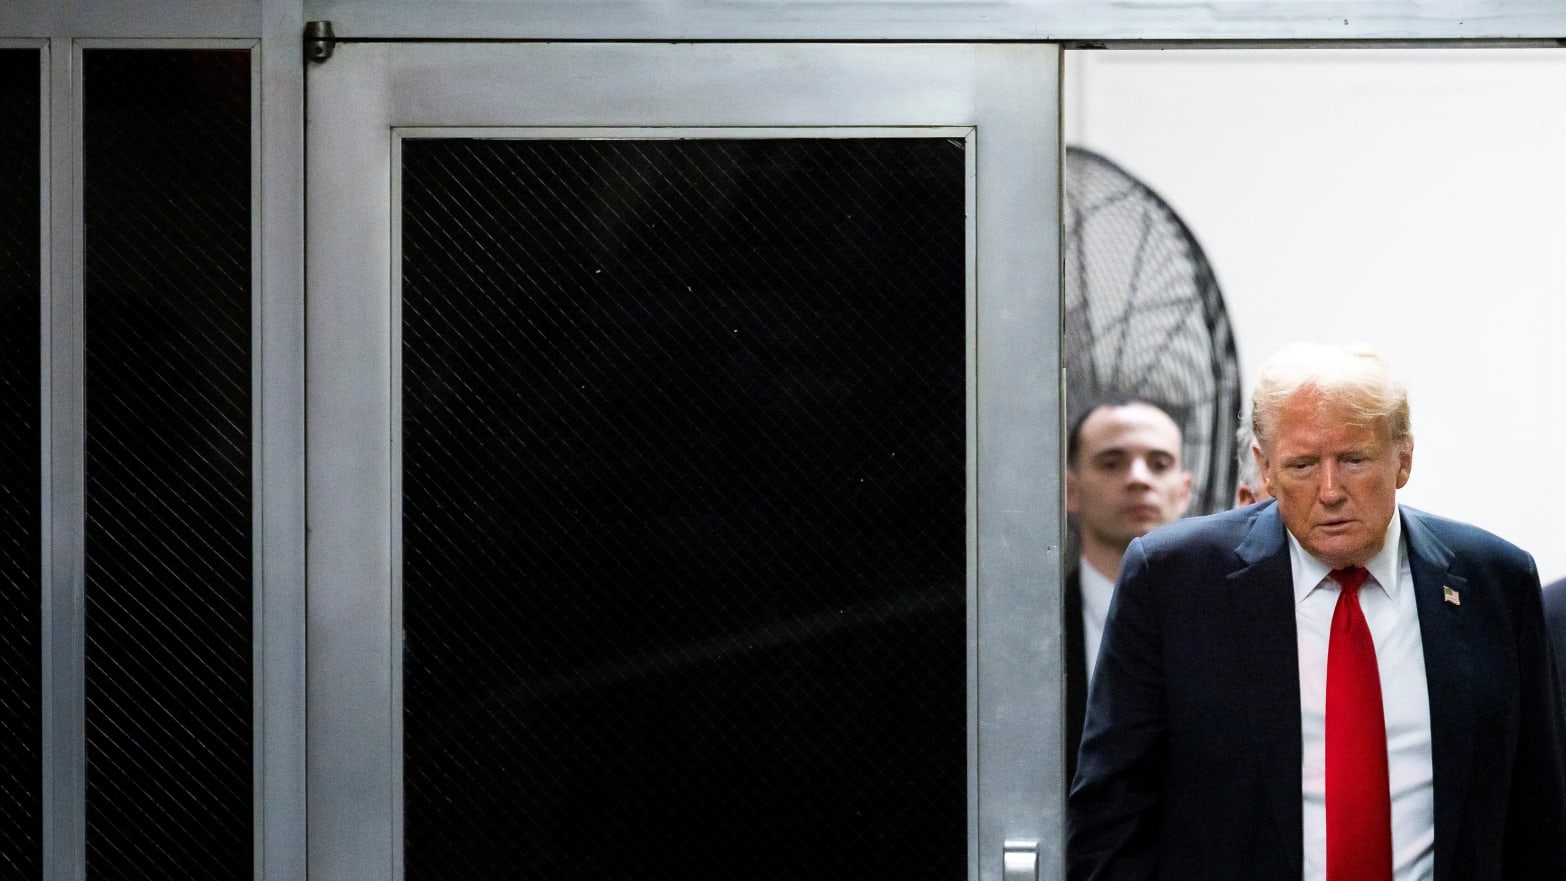 Jurors in Donald Trump’s hush money trial are expected to start deliberating Wednesday.